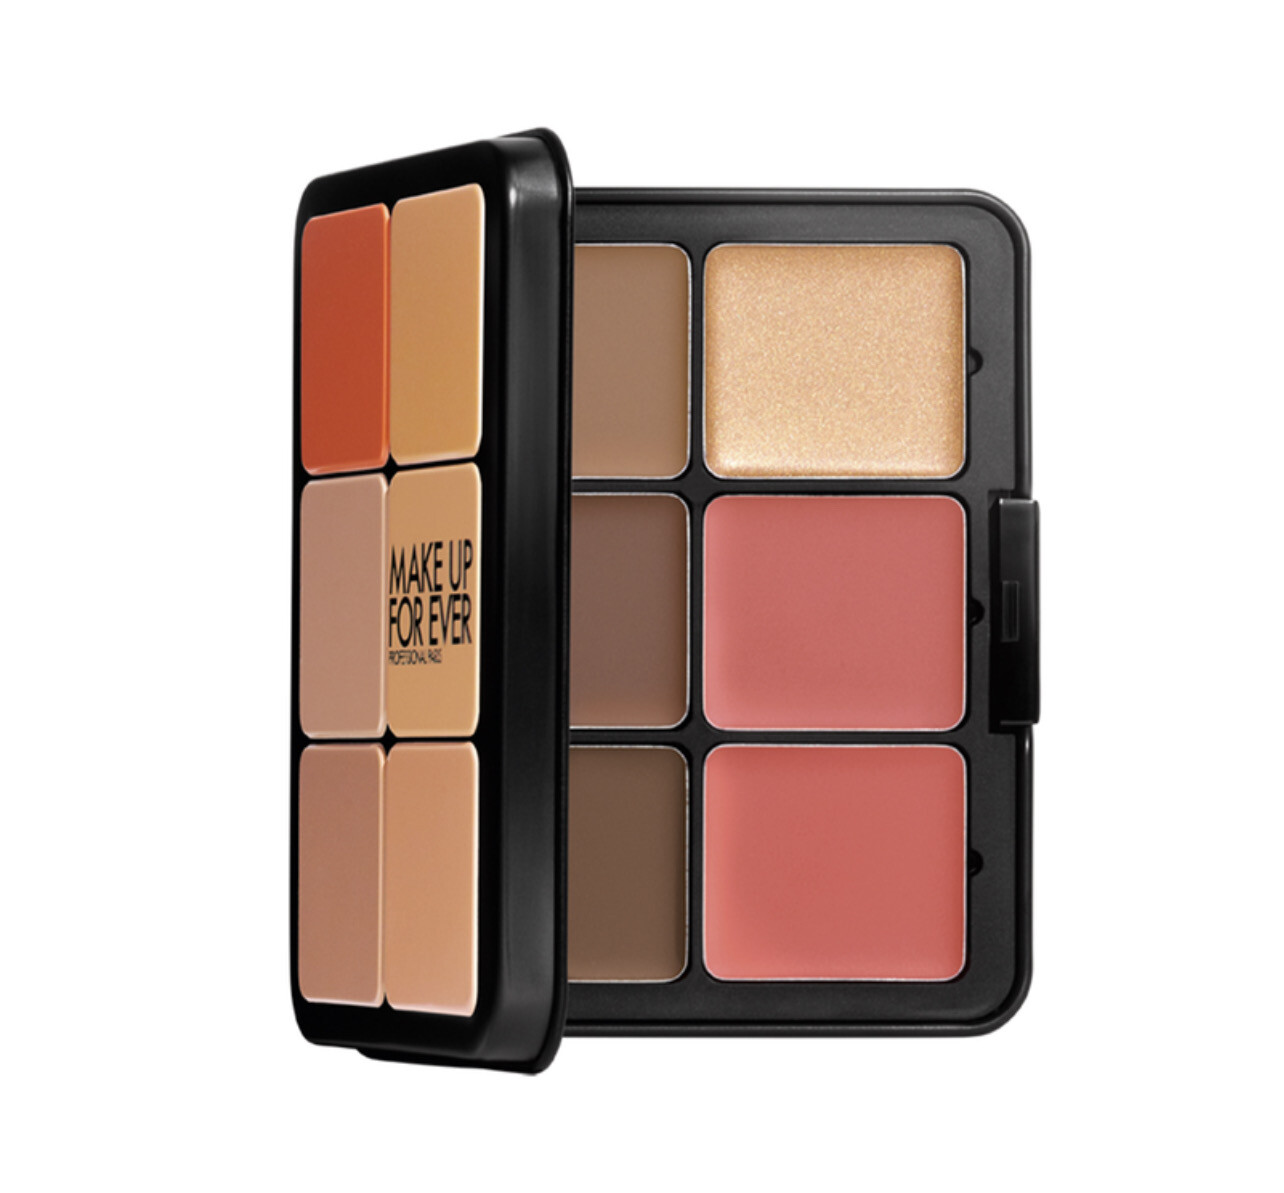 Make Up For Ever - HD SKIN ALL-IN-ONE FACE PALETTE | H2 - Harmony 2 - Tan to deep skintones